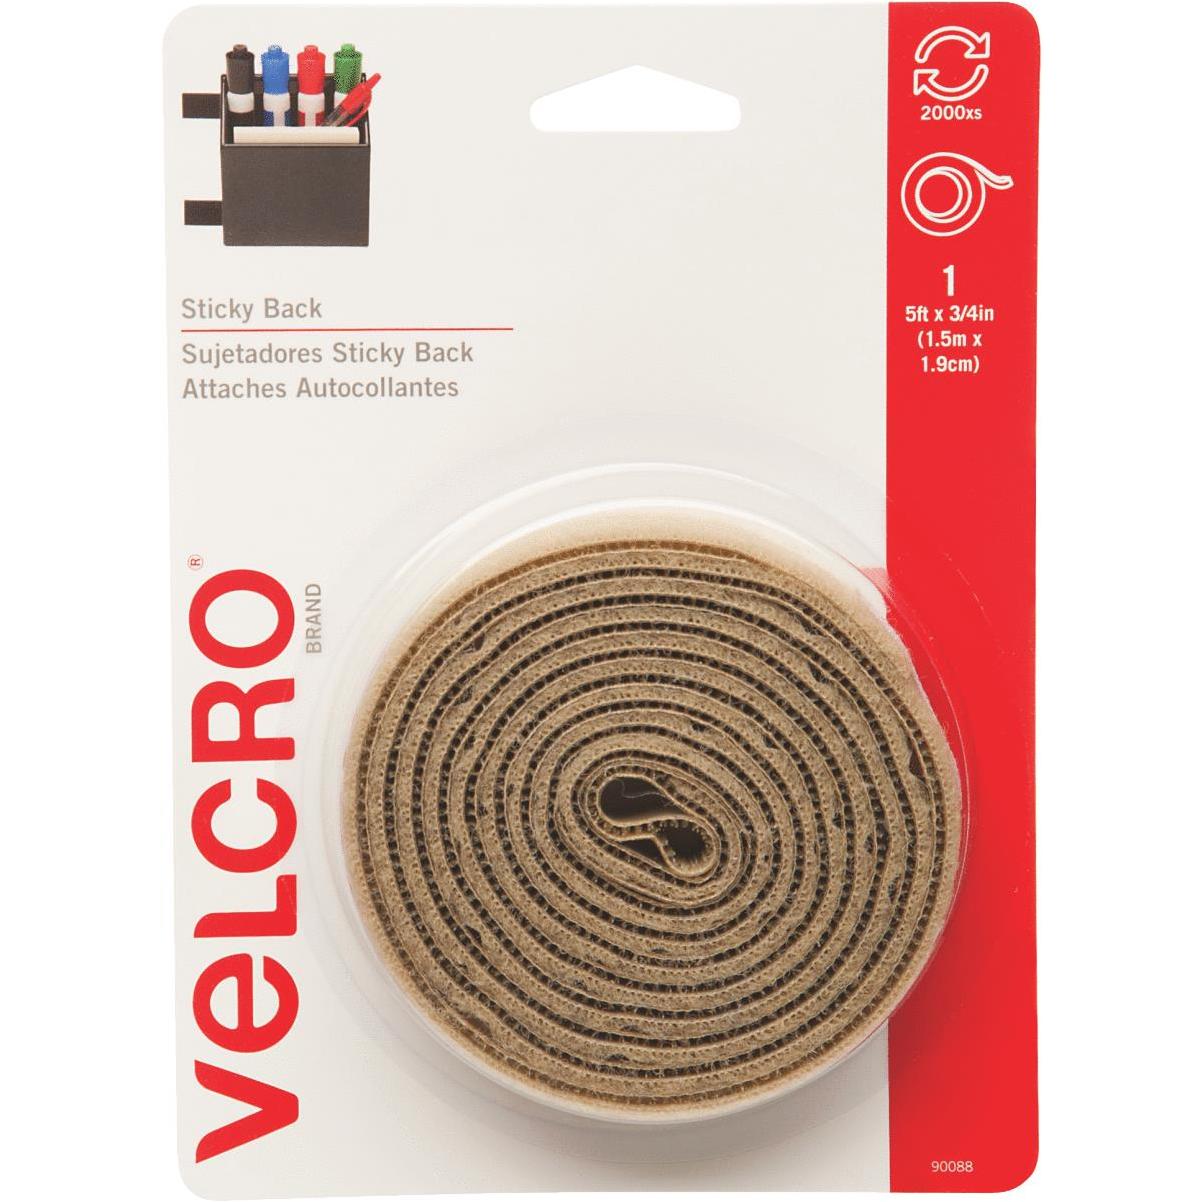 VELCRO Brand 5 Ft x 3/4 In | Black Tape Roll with Adhesive | Cut Strips to  Length | Sticky Back Hook and Loop Fasteners | Perfect for Home, Office or